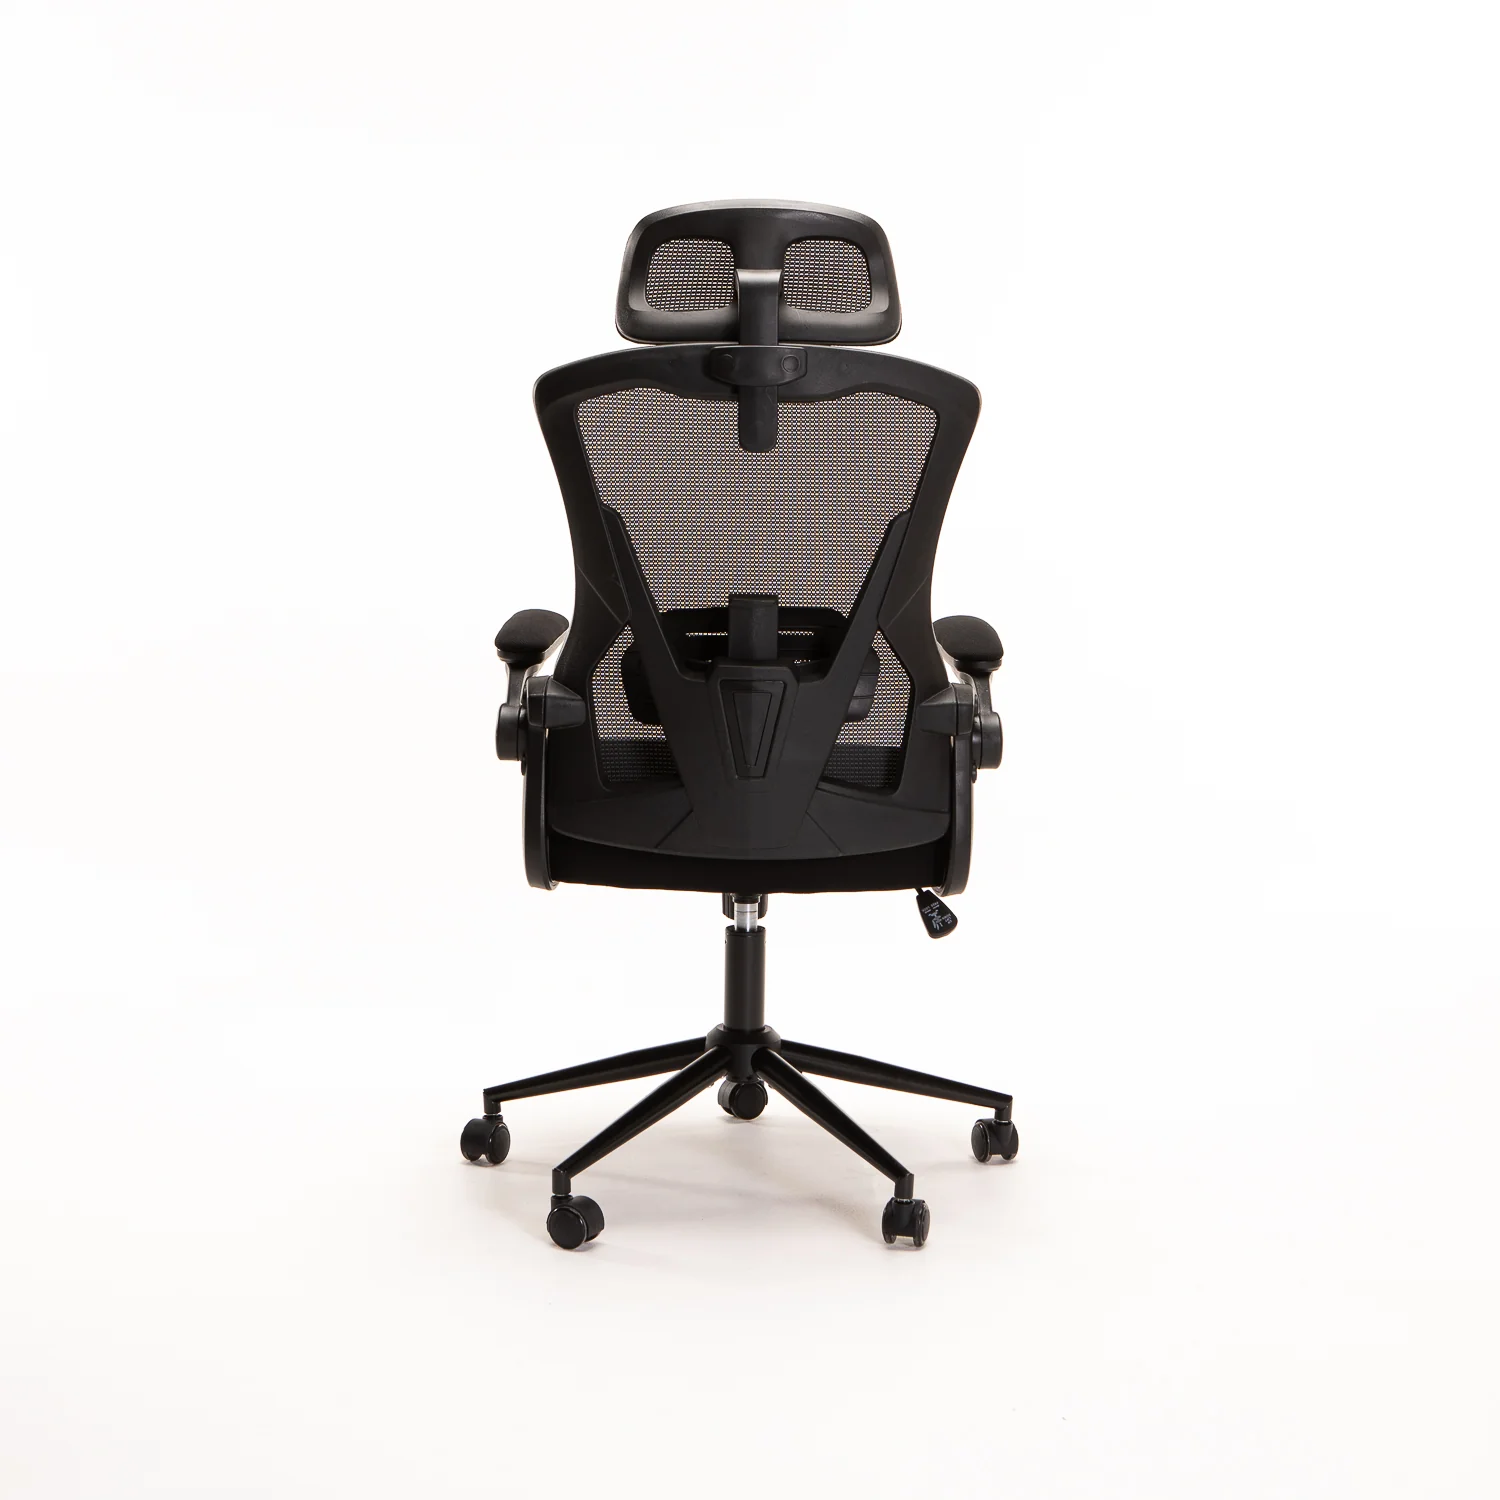 HIGHBACK DELUXE OFFICE CHAIR AH571A WITH HEADREST 2